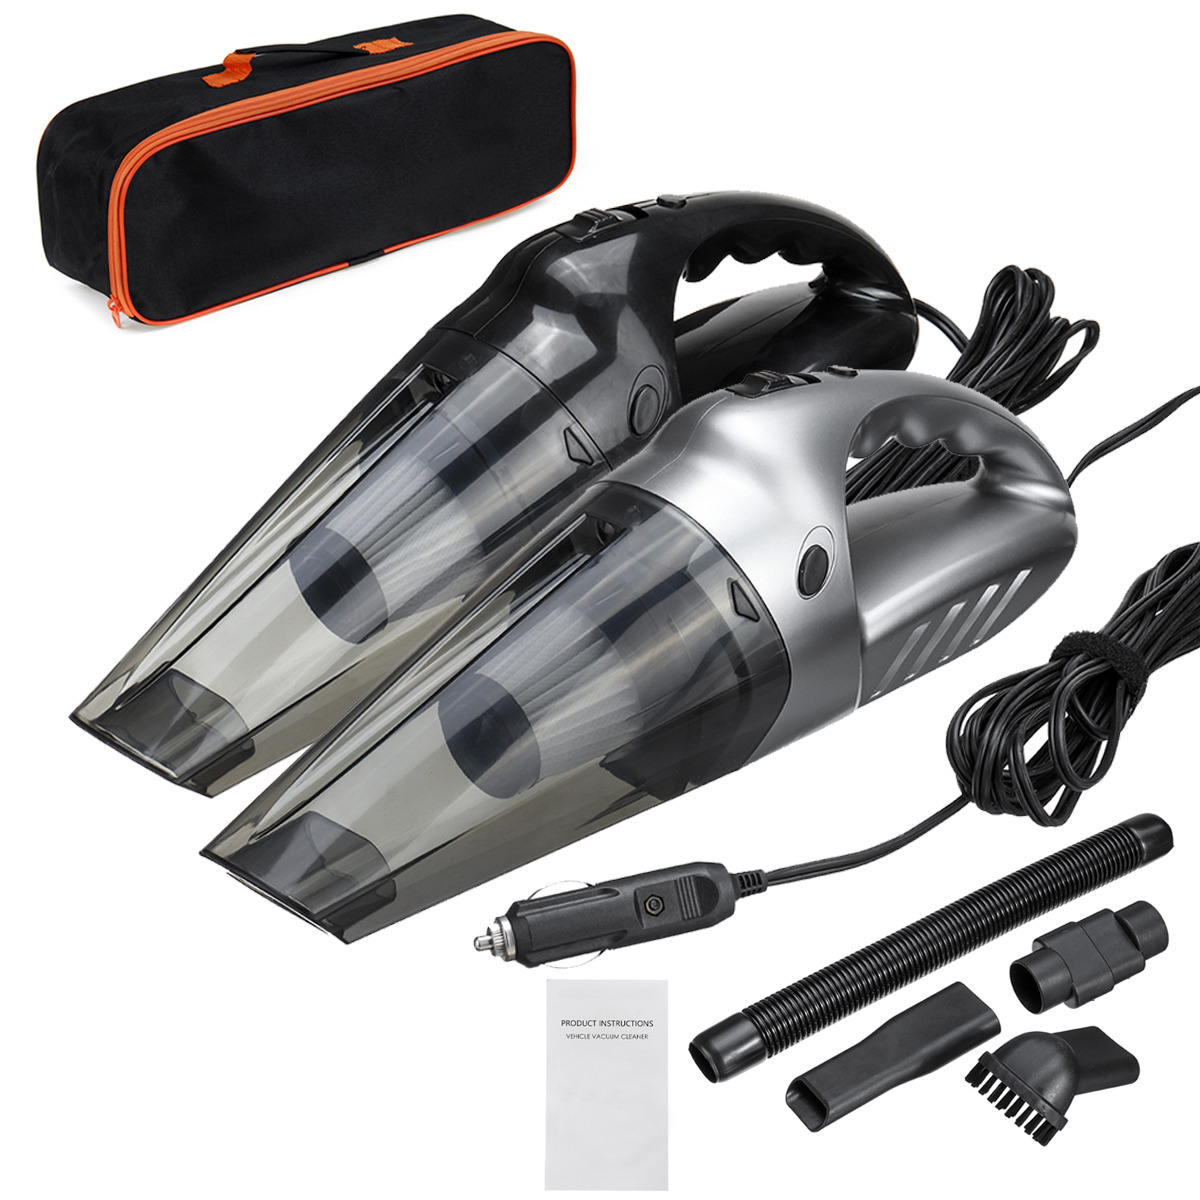 120W-Portable-Auto-Car-Handheld-Vacuum-Cleaner-Duster-Wet--Dry-Dirt-Suction-with-LED-Light-1624459-10